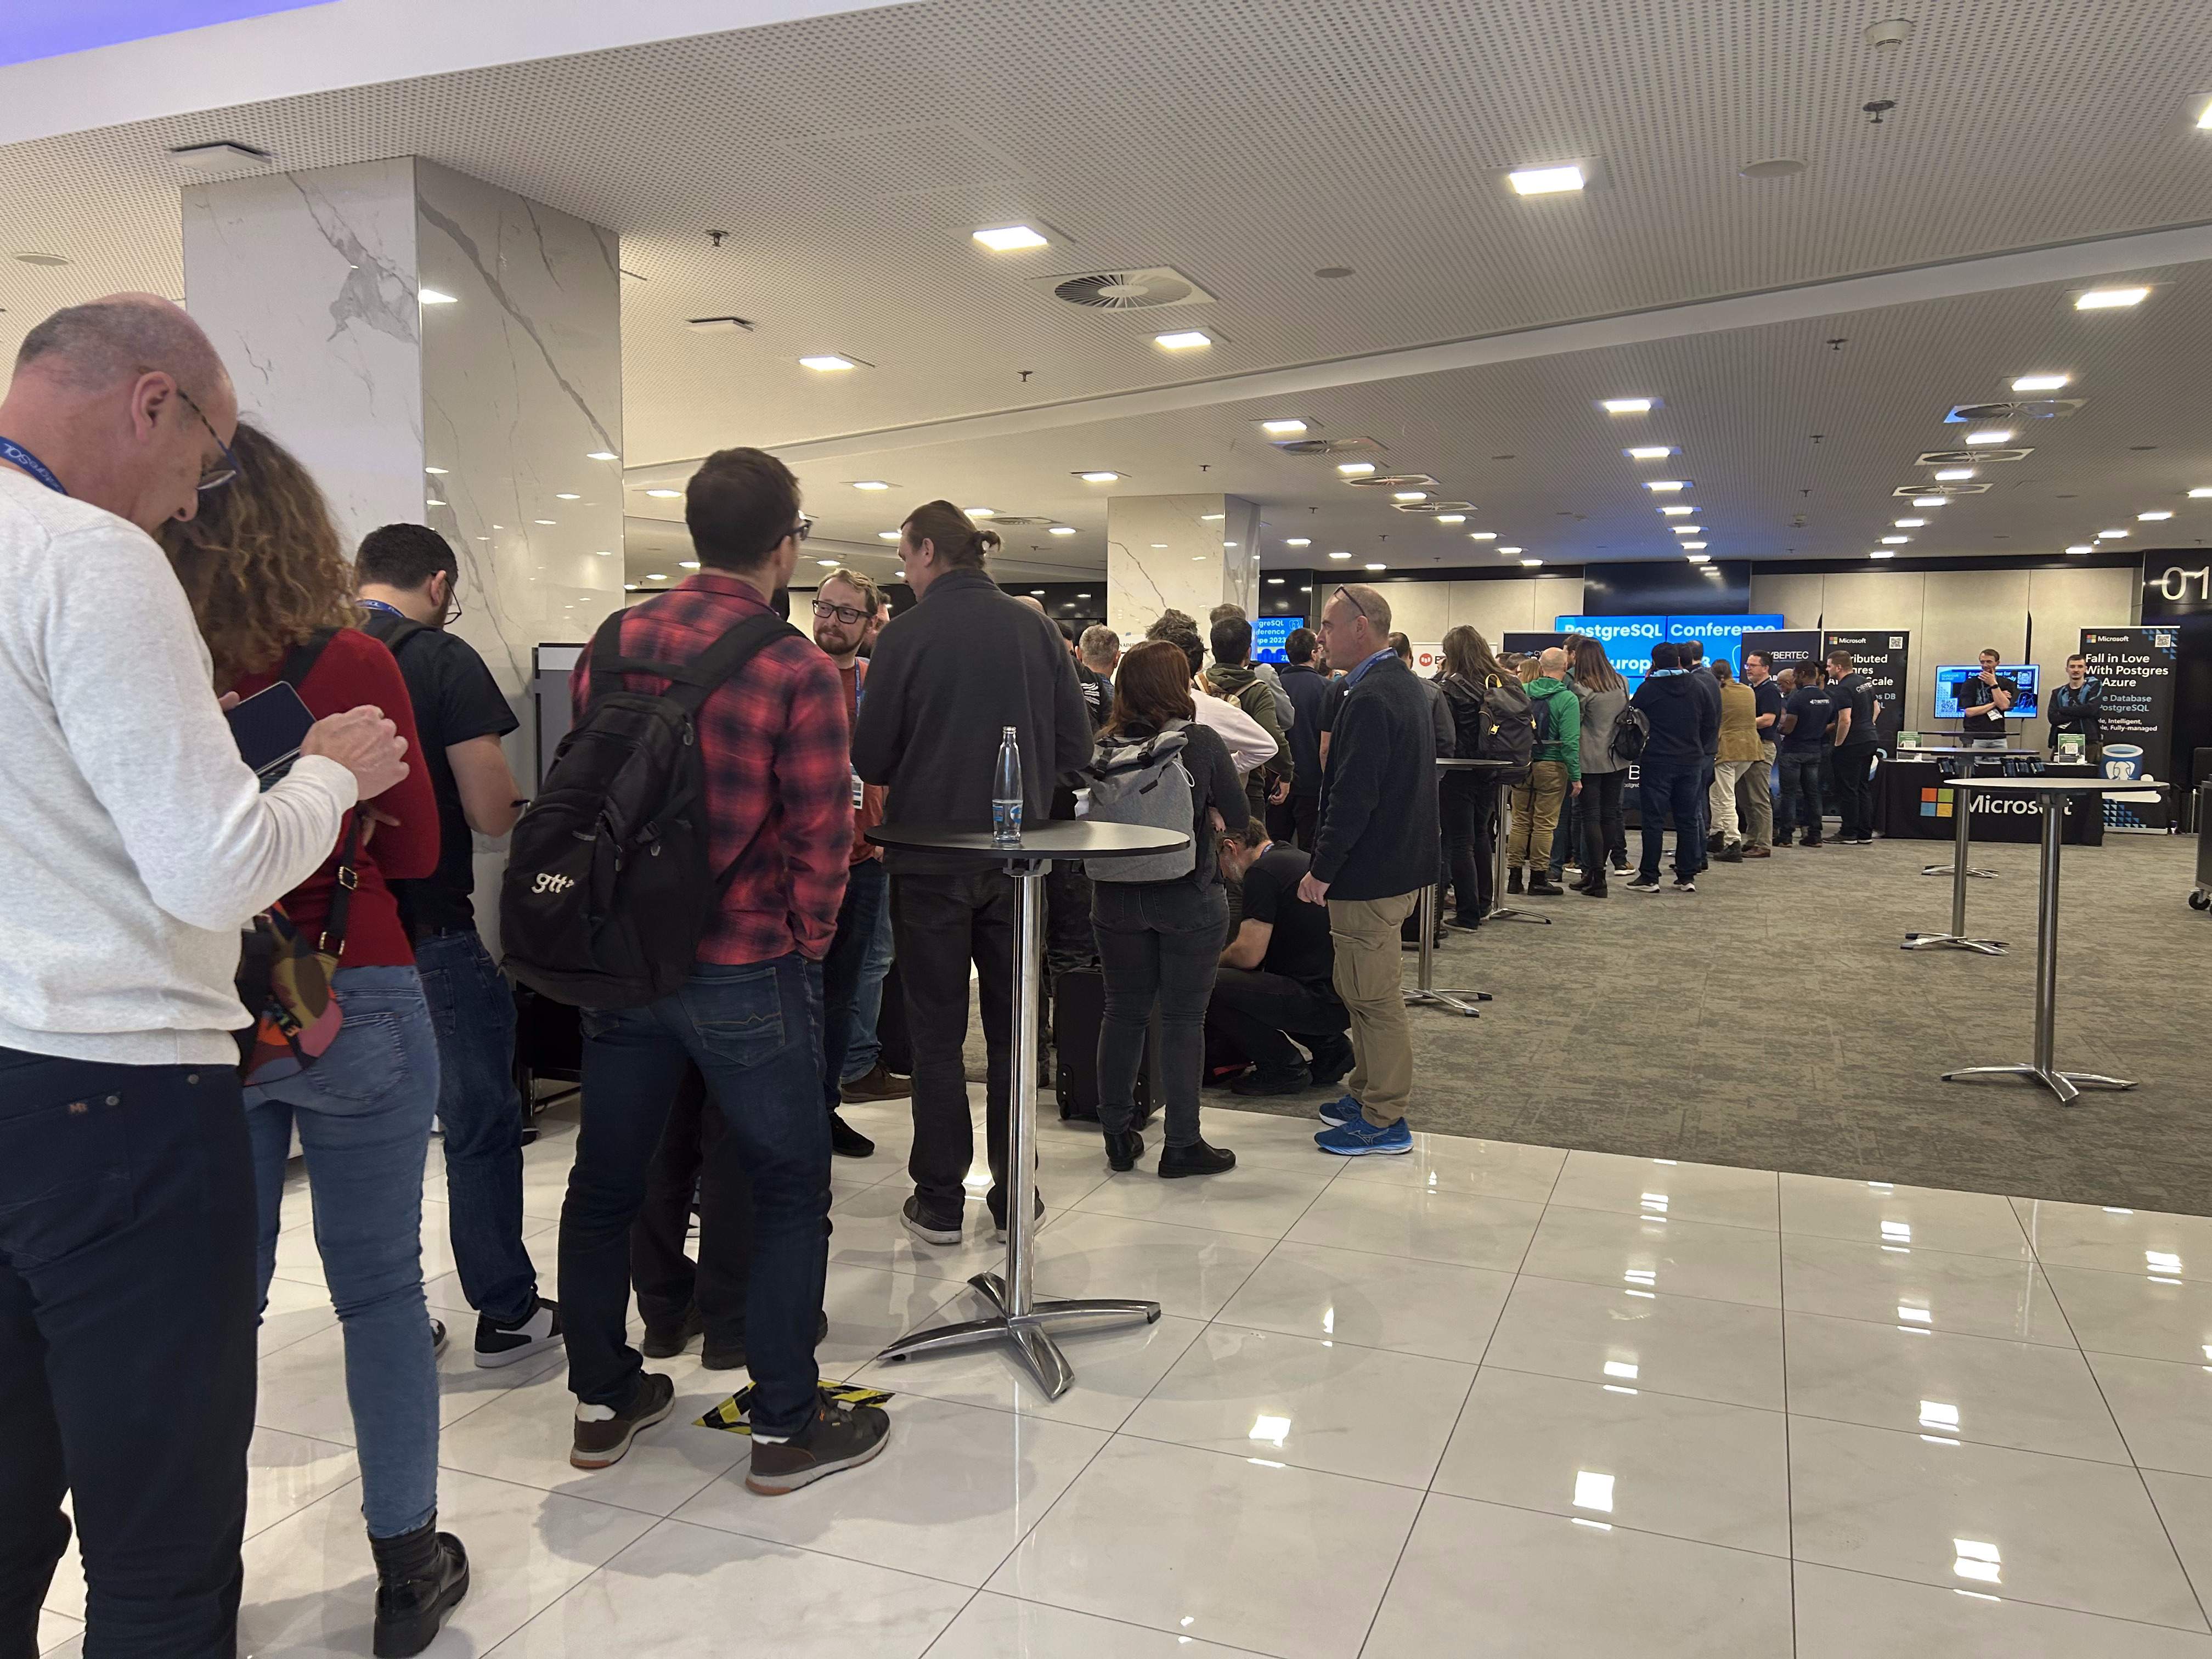 Long queue for the PostgreSQL 16 Administration Cookbook signing event (photo by Sabine Schatzer)